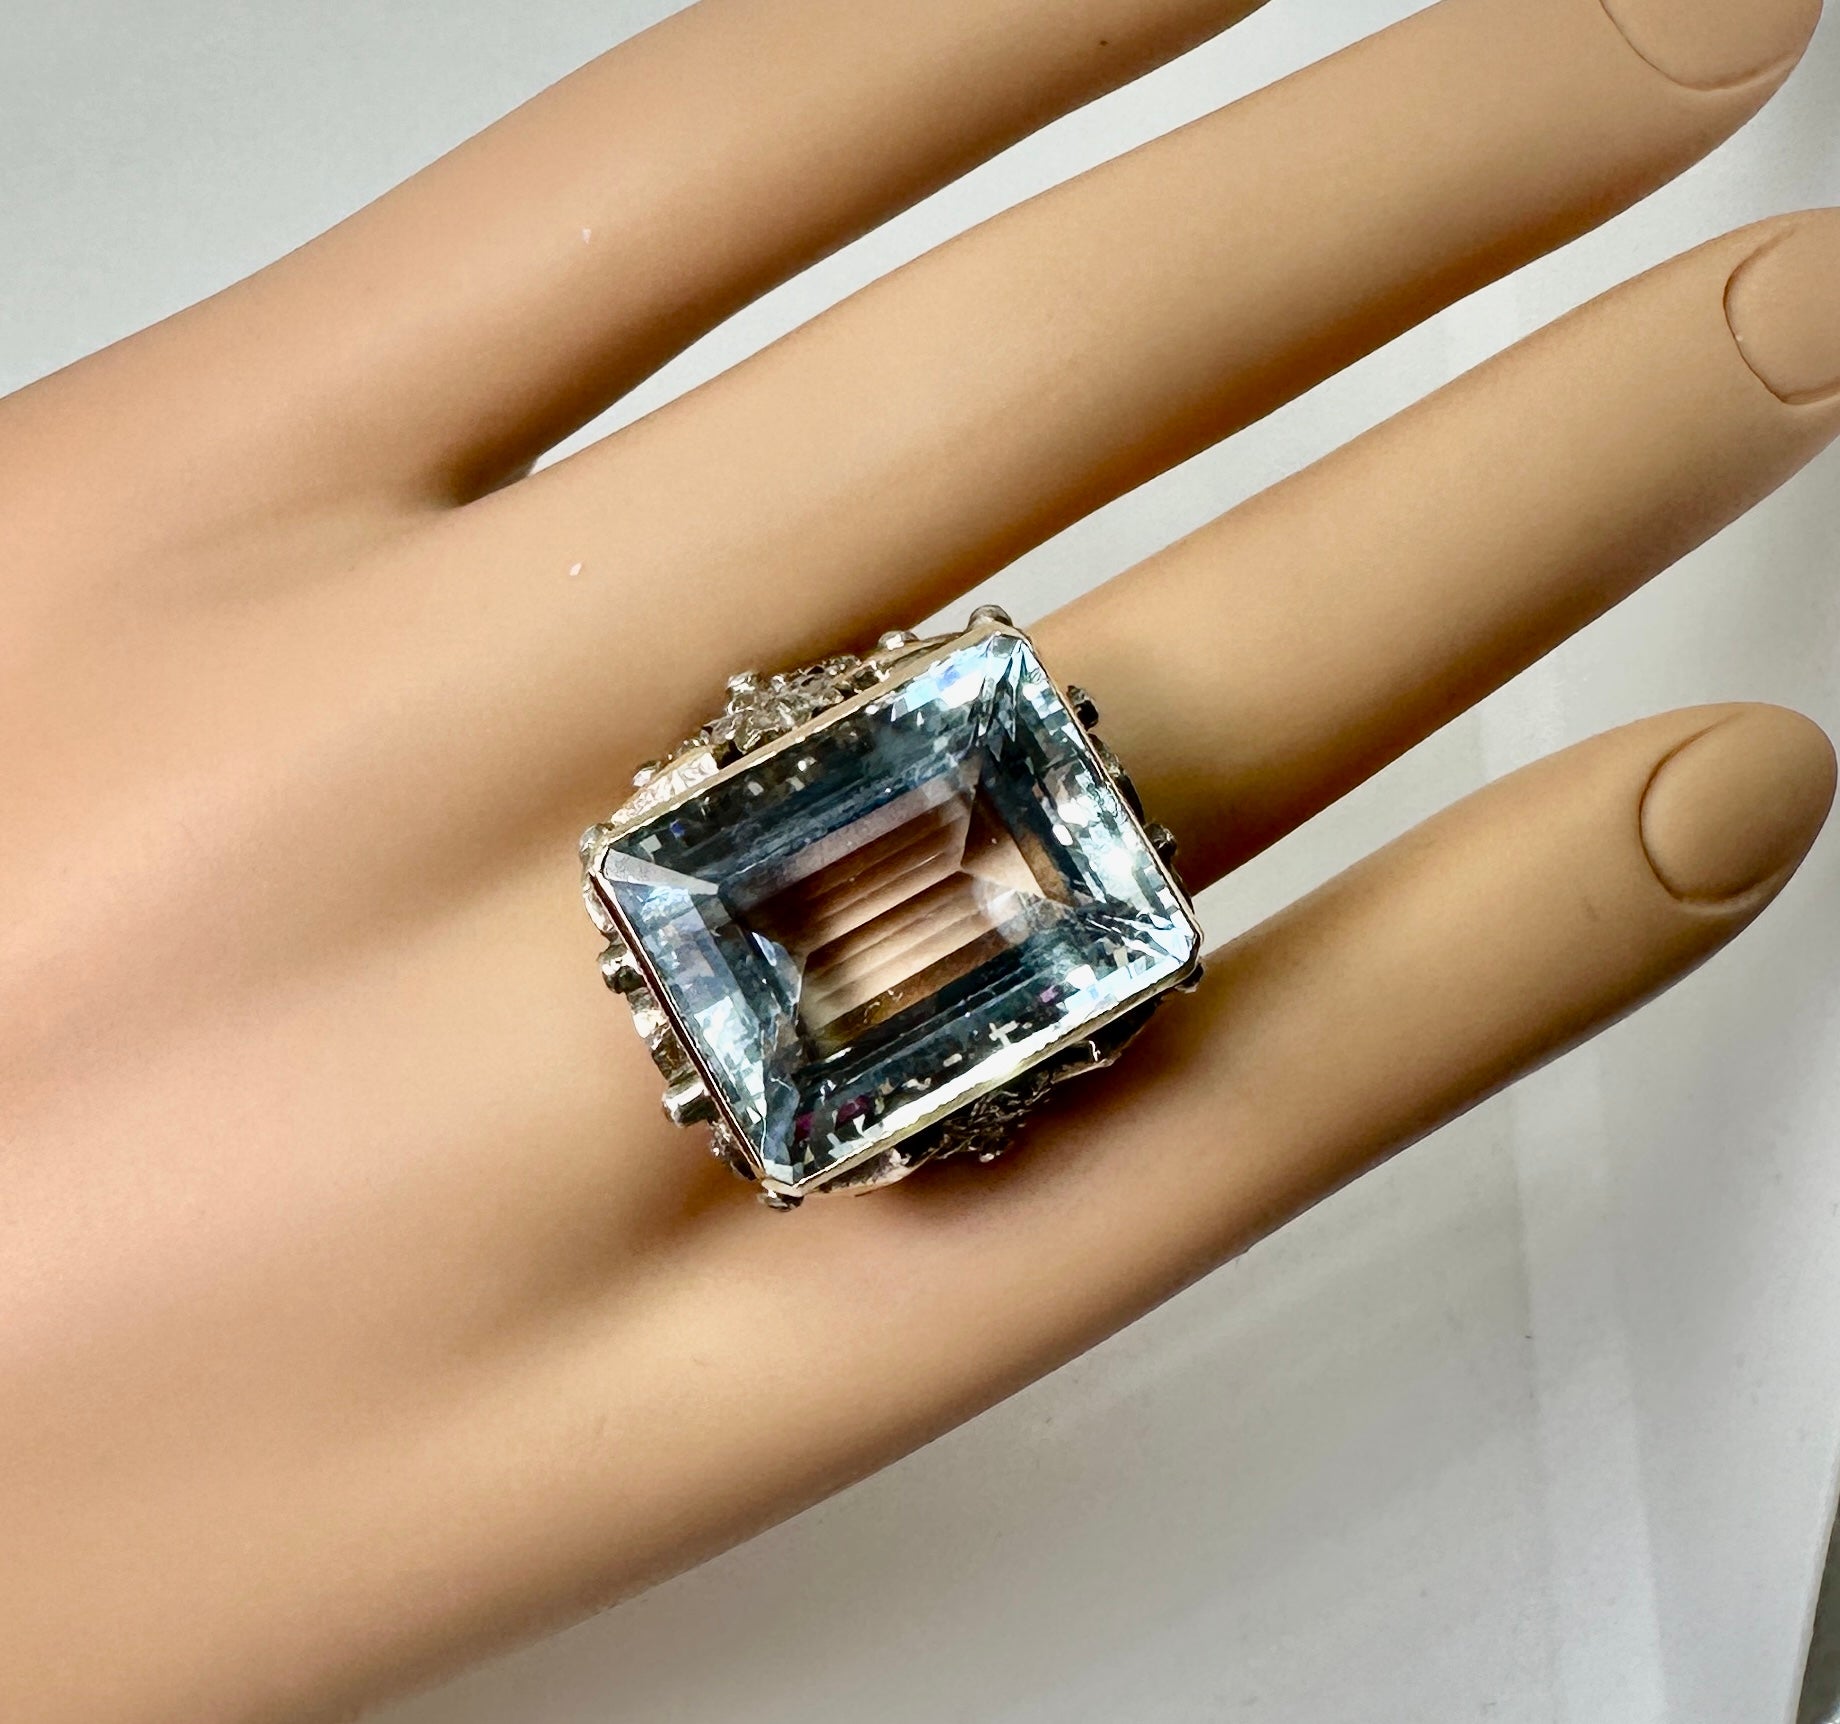 We are so delighted to have this extraordinary 30 Carat antique natural Aquamarine Rose Cut Diamond and Ruby Ring.  The magnificent emerald cut aquamarine is 21mm long, 17mm wide and 13mm deep and is approximately 30 Carats.  The cut is exquisite. 